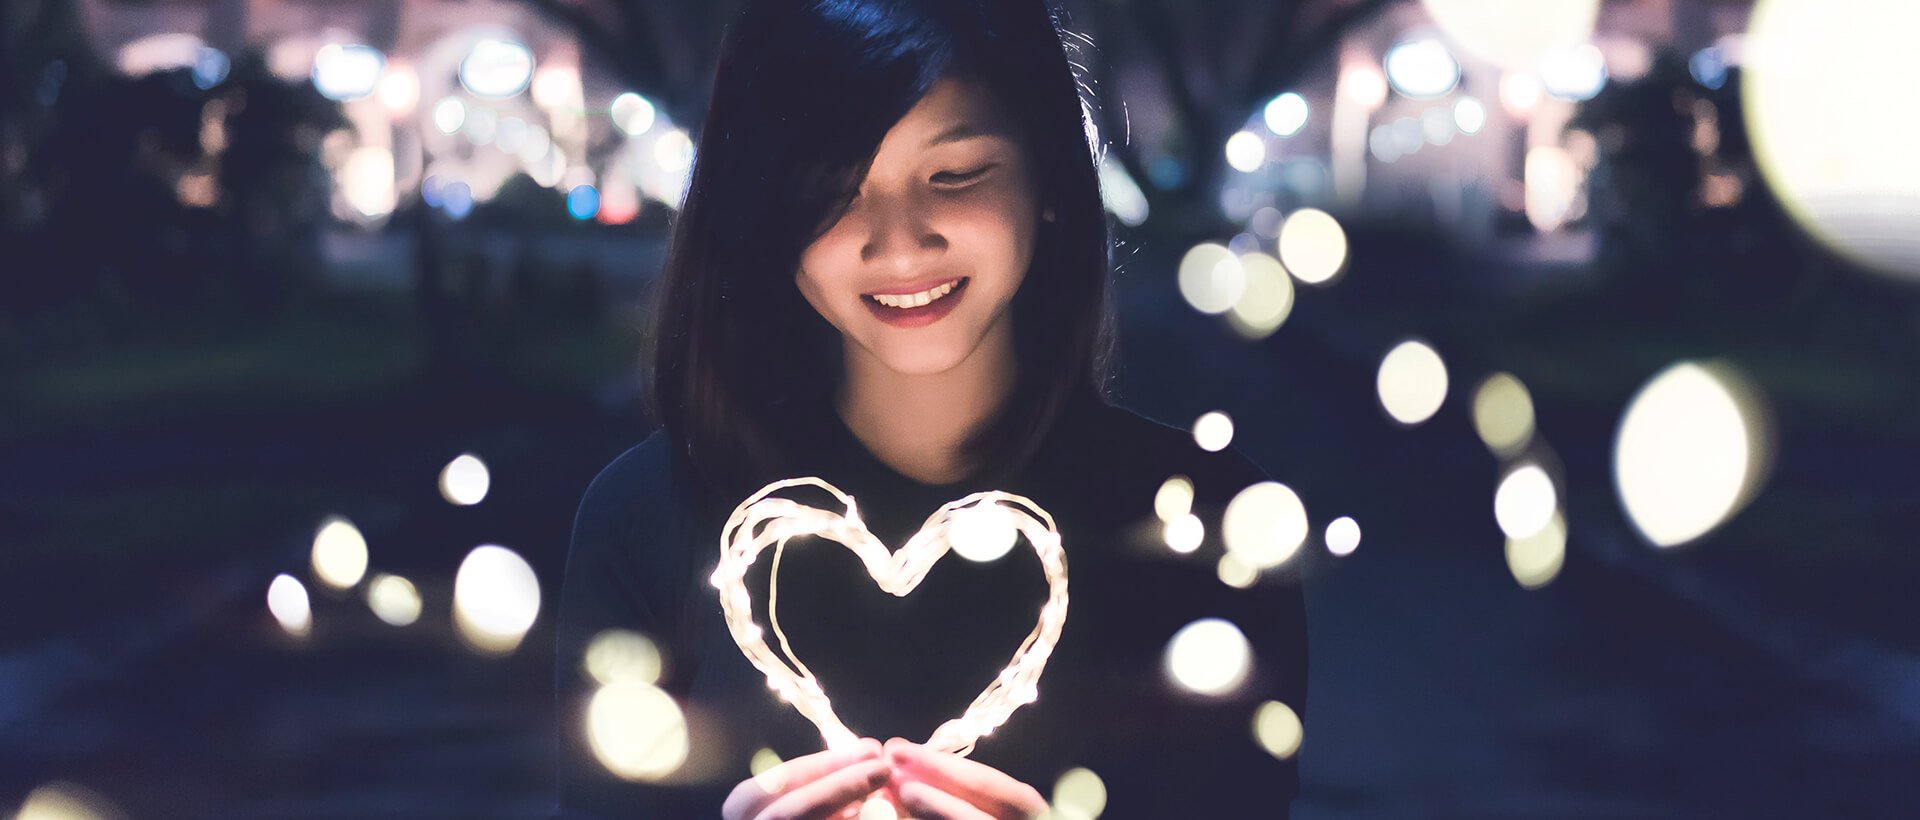 a woman holding a lit up heart in her hands.